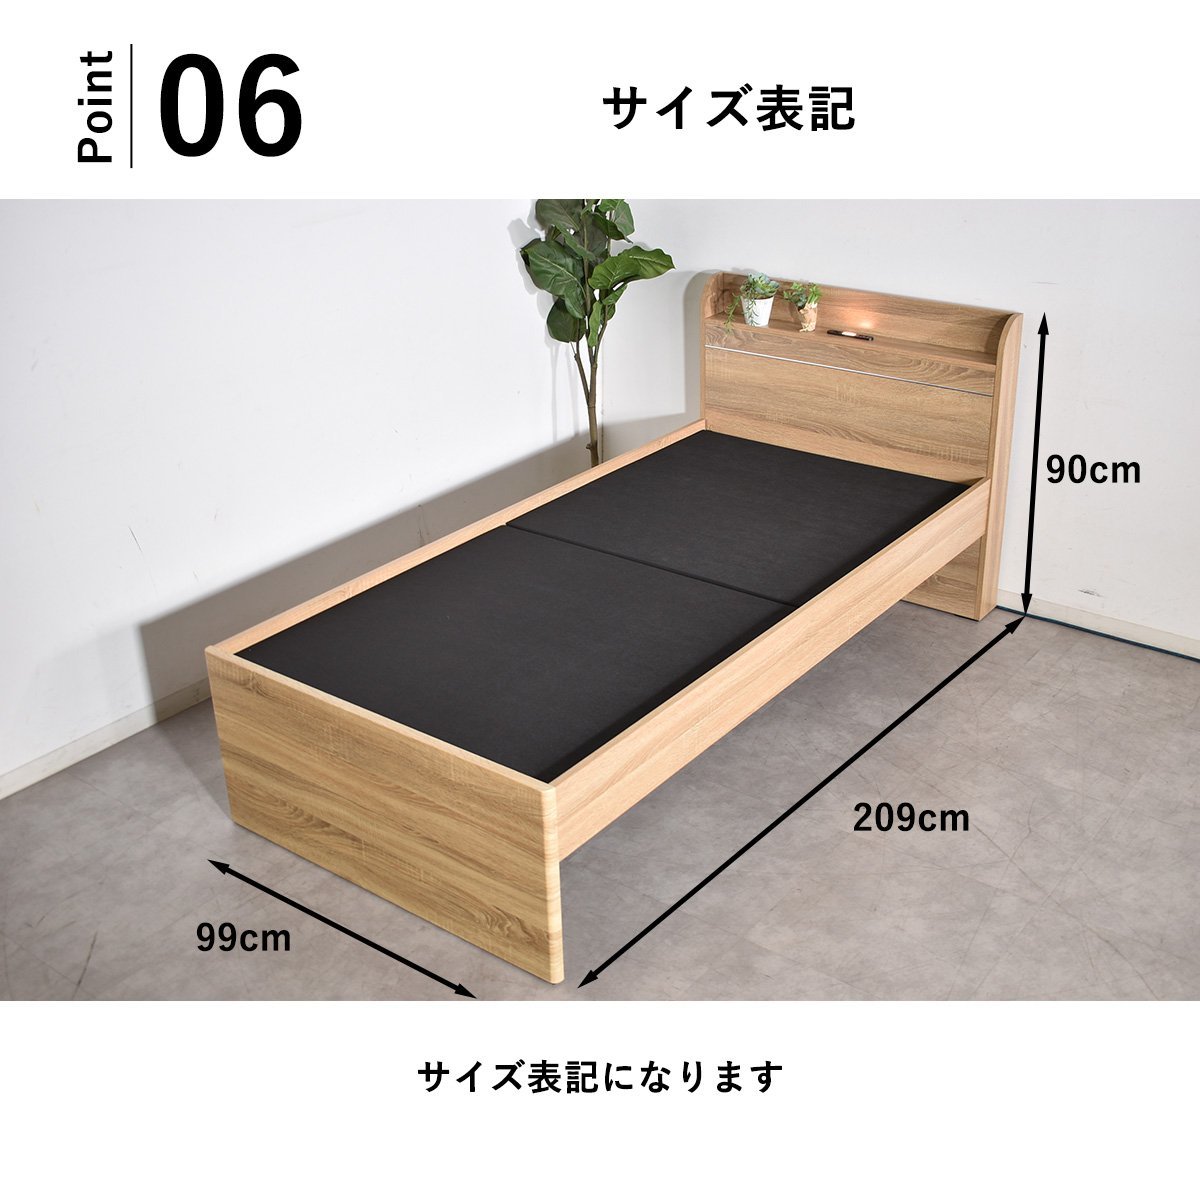 [ limitation free shipping ] lighting outlet attaching domestic production tatami single bed outlet furniture [ new goods unused exhibition goods ]KEN